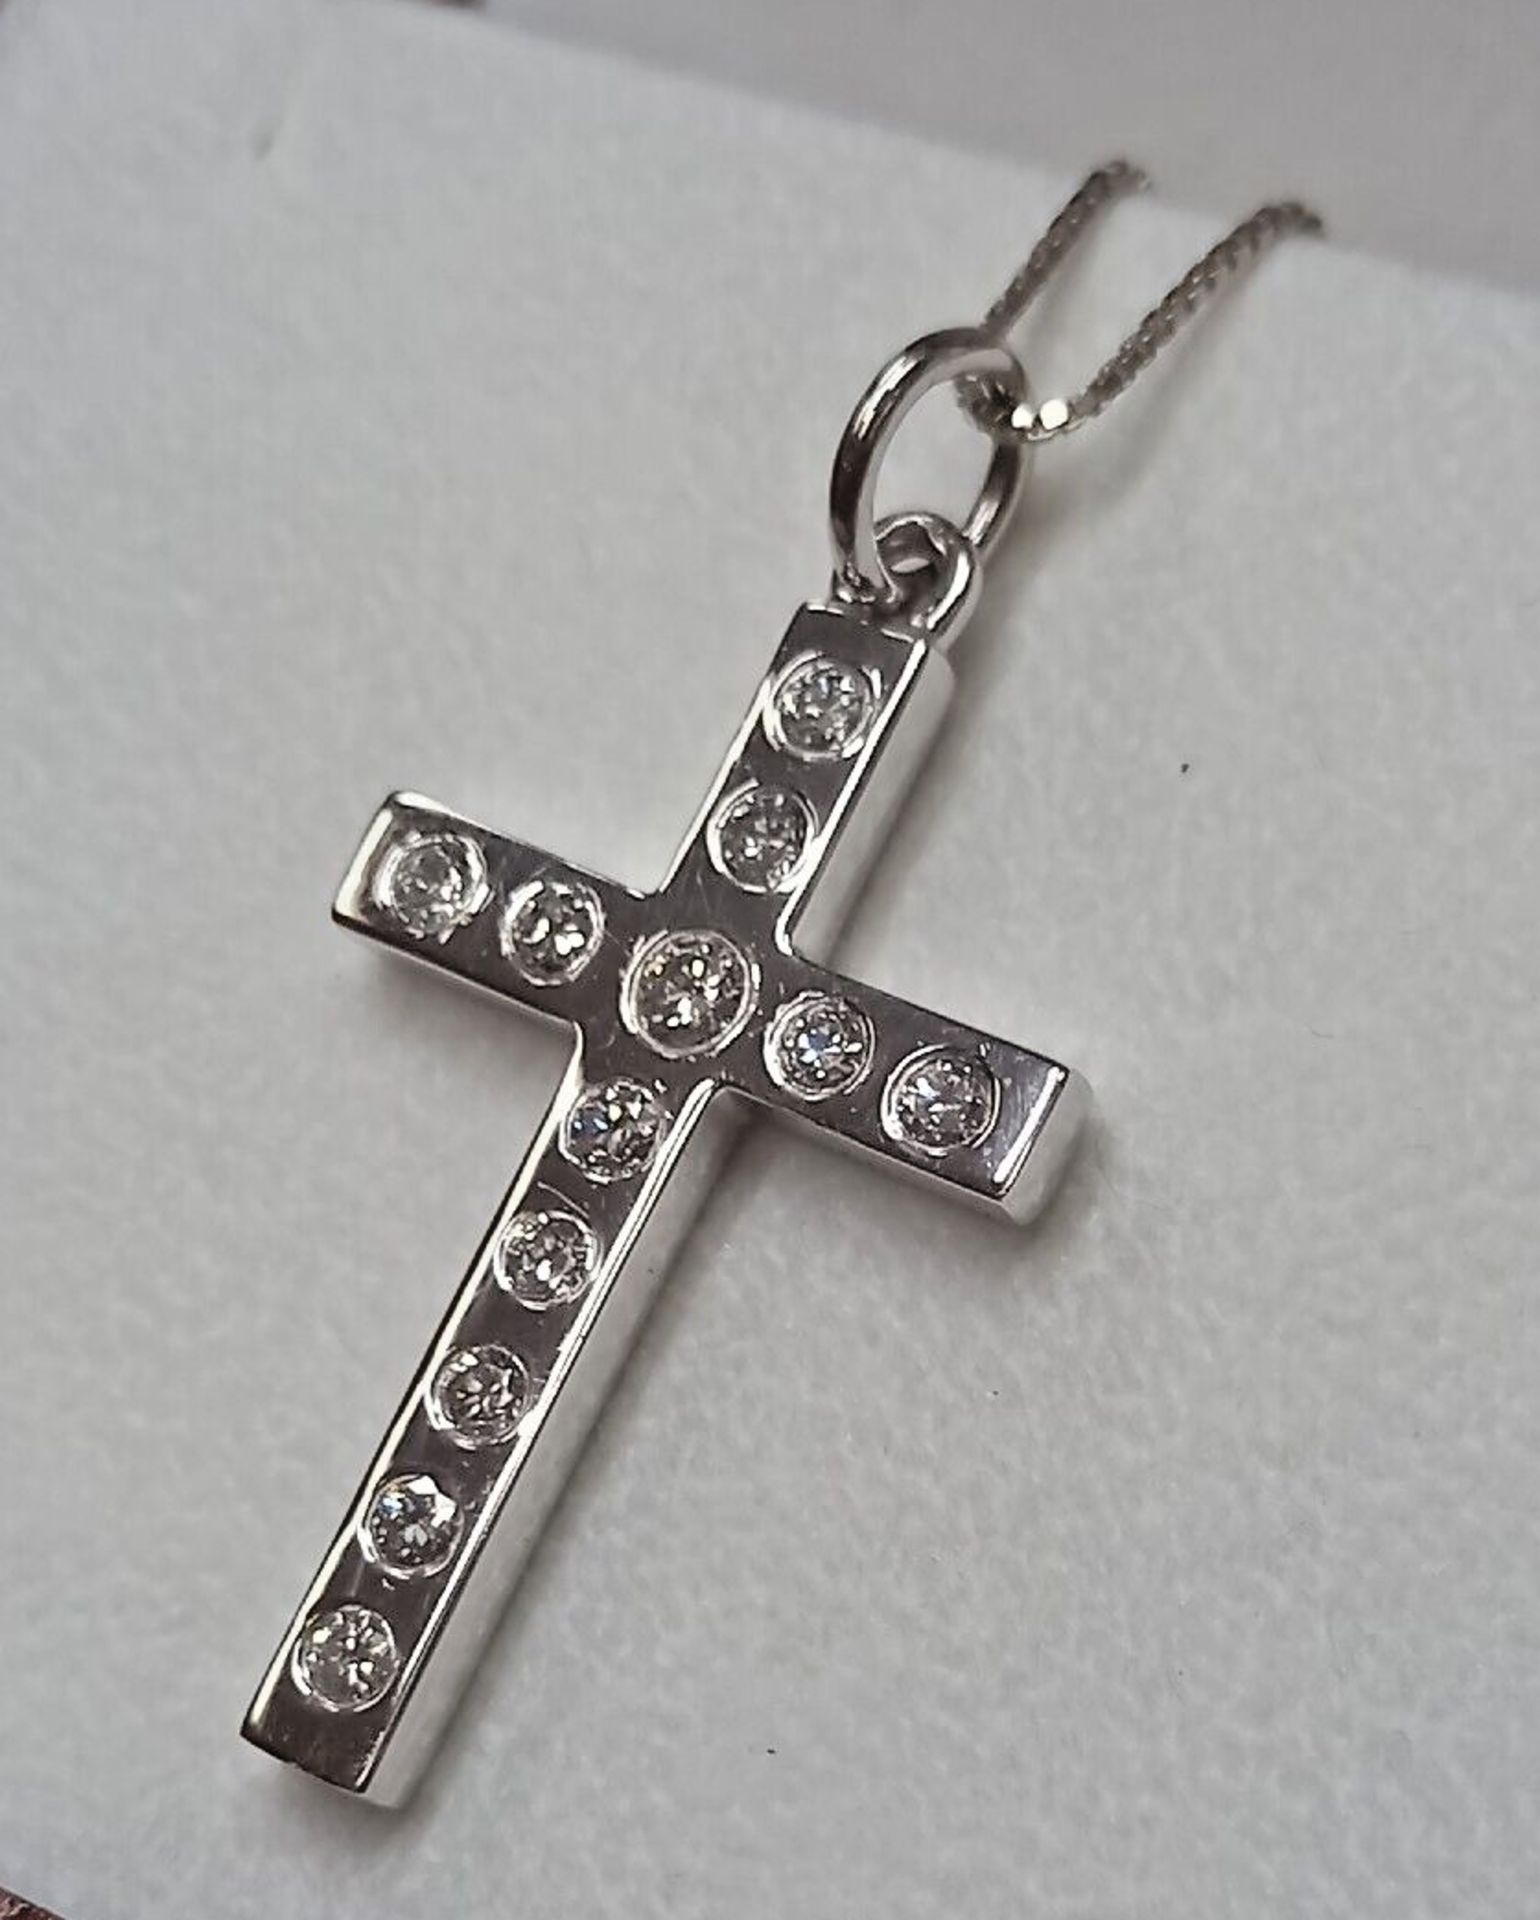 1.30CT HAND MADE DIAMOND CROSS 18CT WHITE GOLD/18CT WHITE GOLD CHAIN + GIFT BOX + VALUATION OF £3995